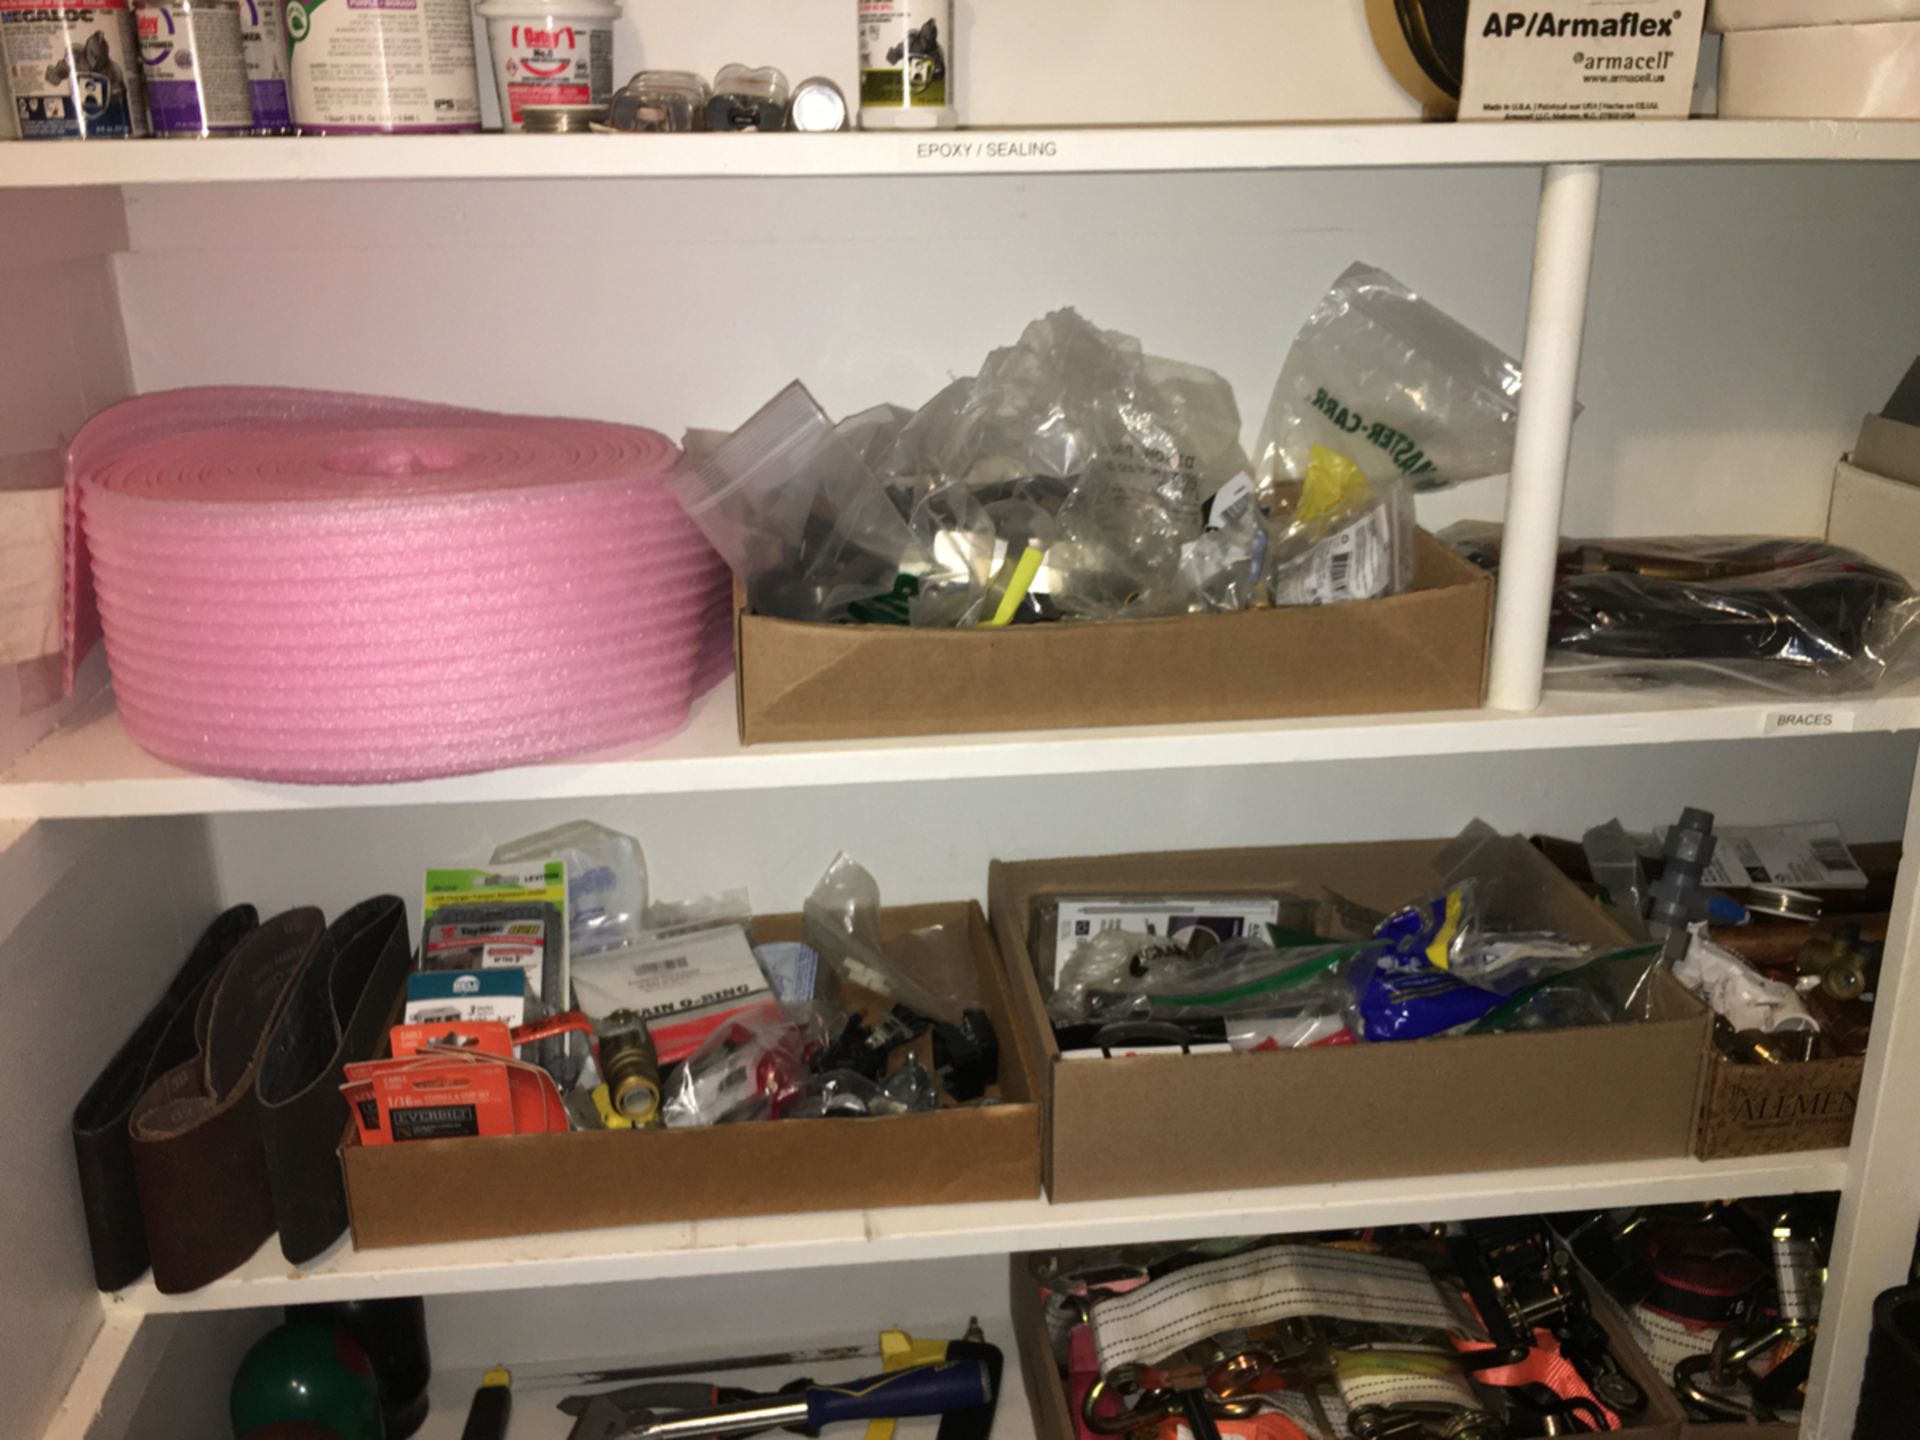 Contents Of Parts And Spares Room - Image 15 of 16